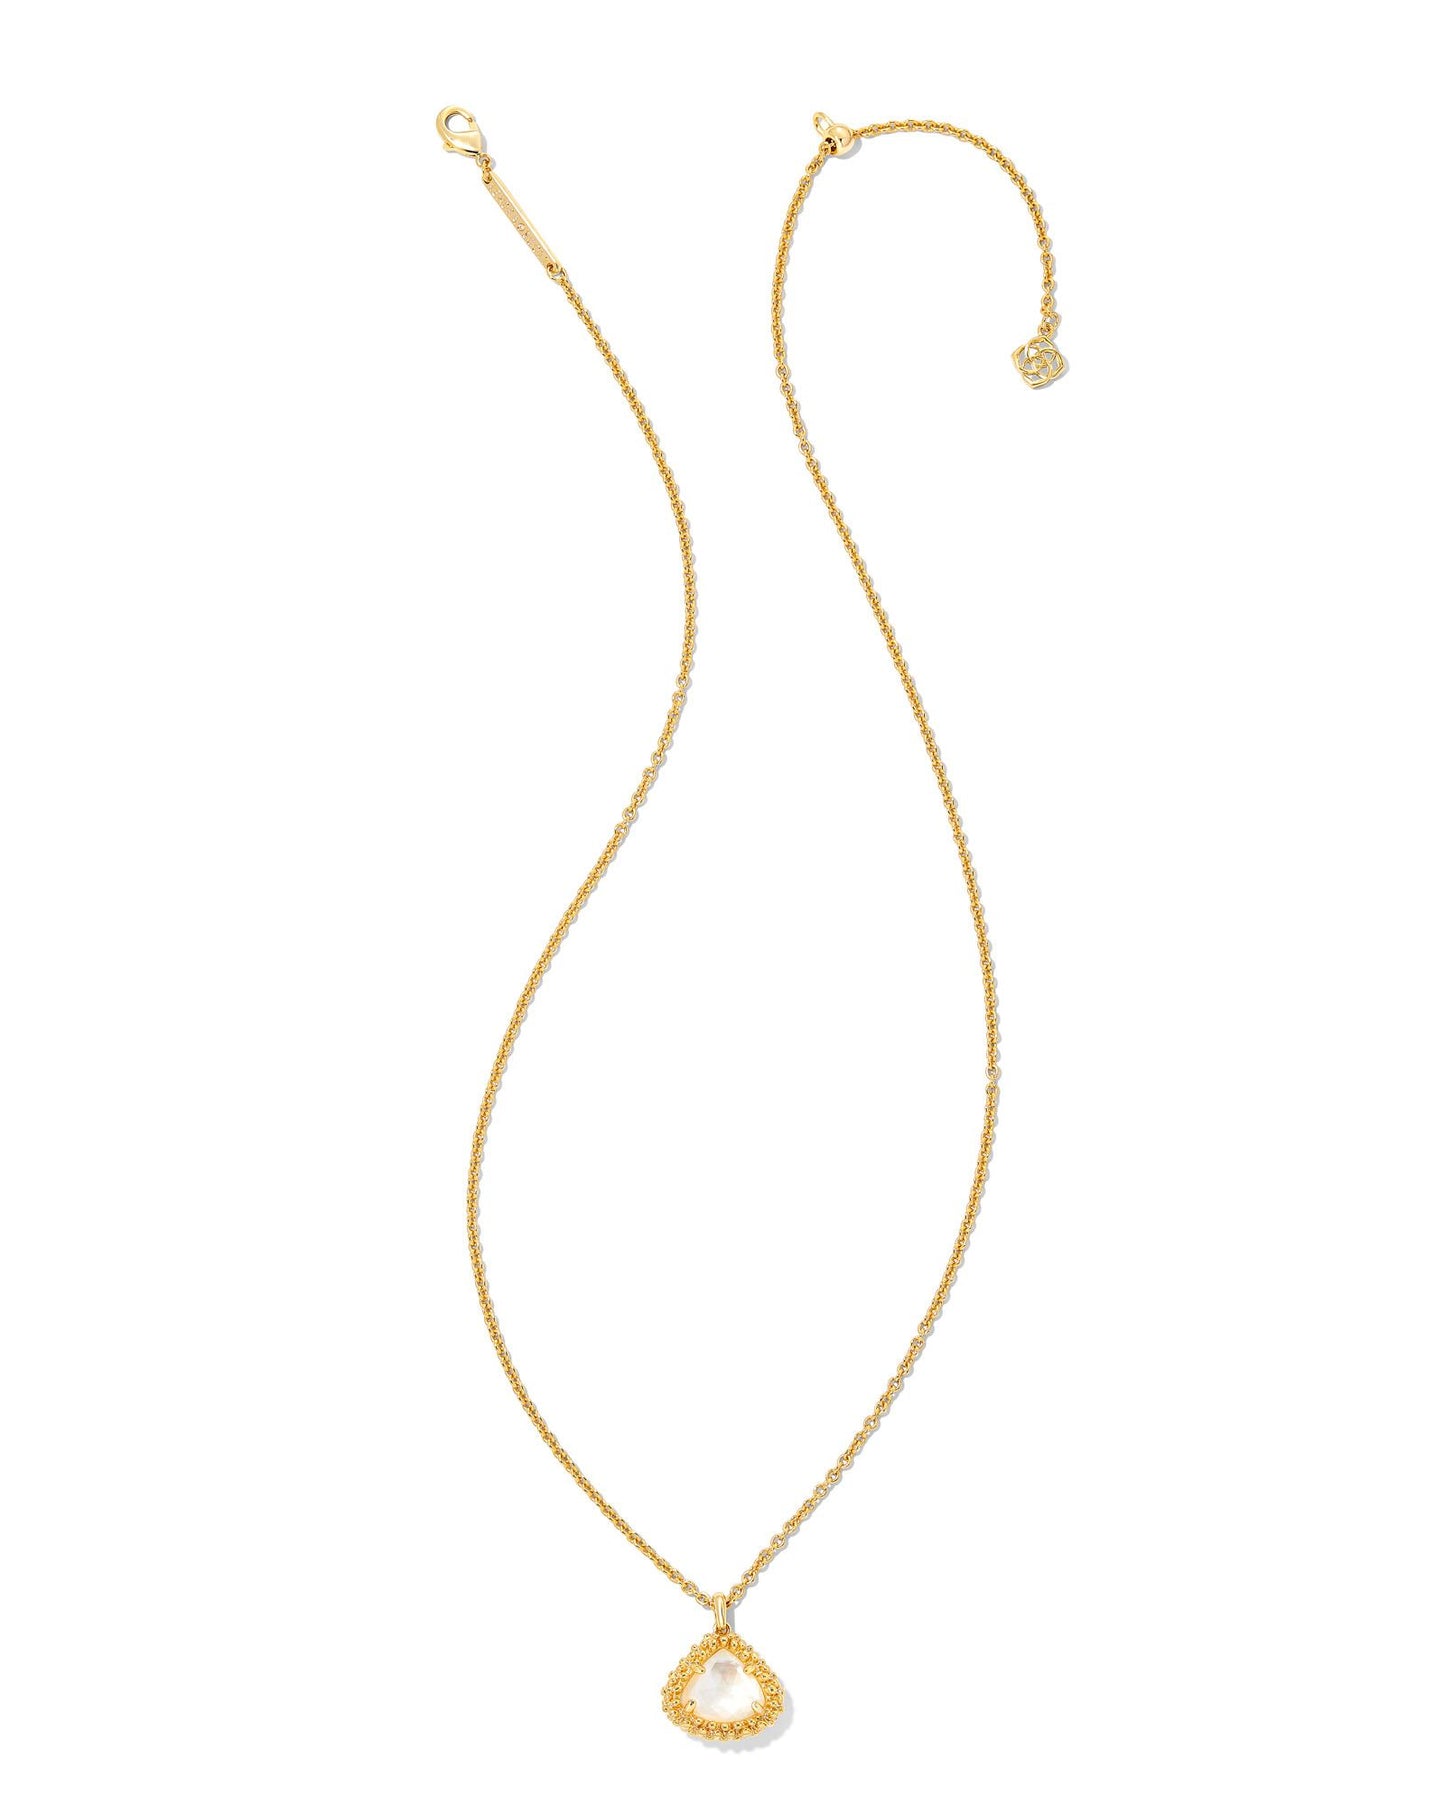 Framed Kendall Necklace | Gold Ivory Mother-of-Pearl